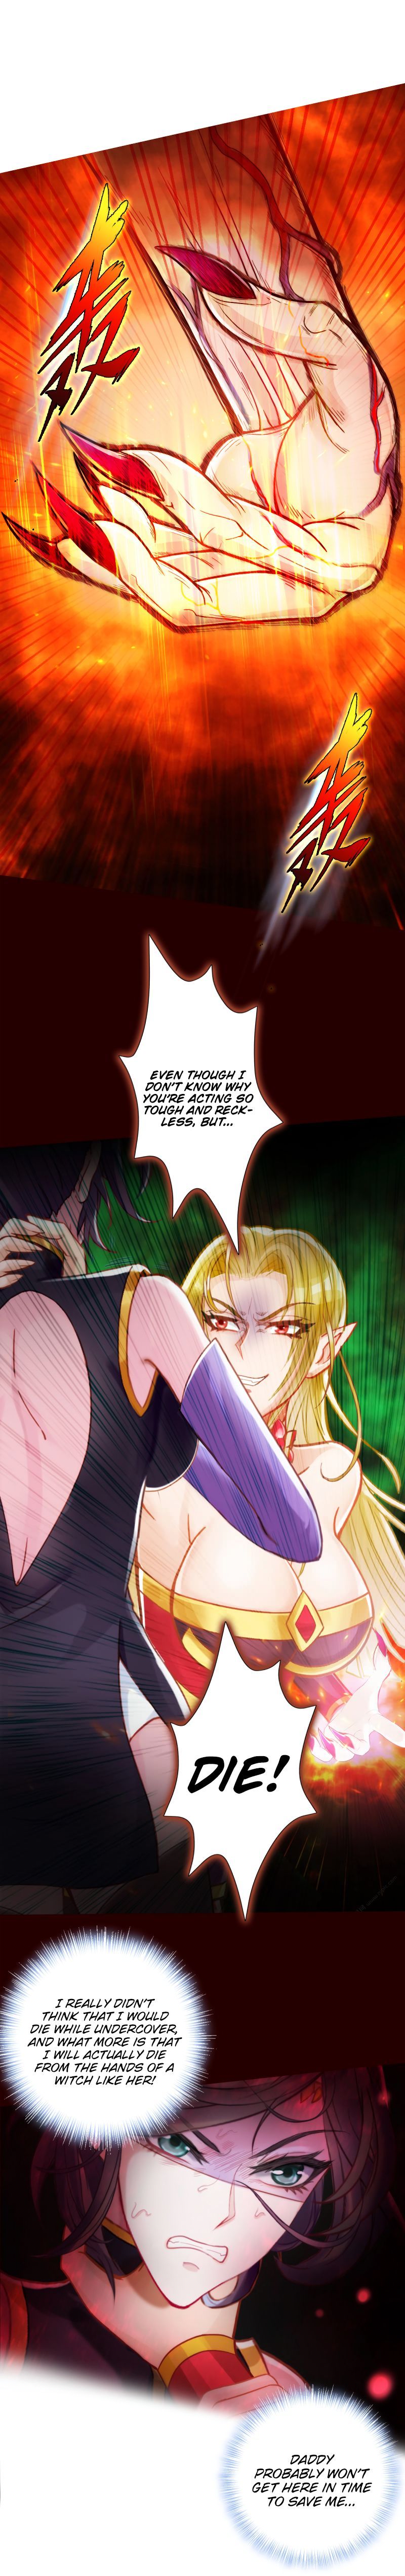 Lang Huan Library Chapter 53 page 9